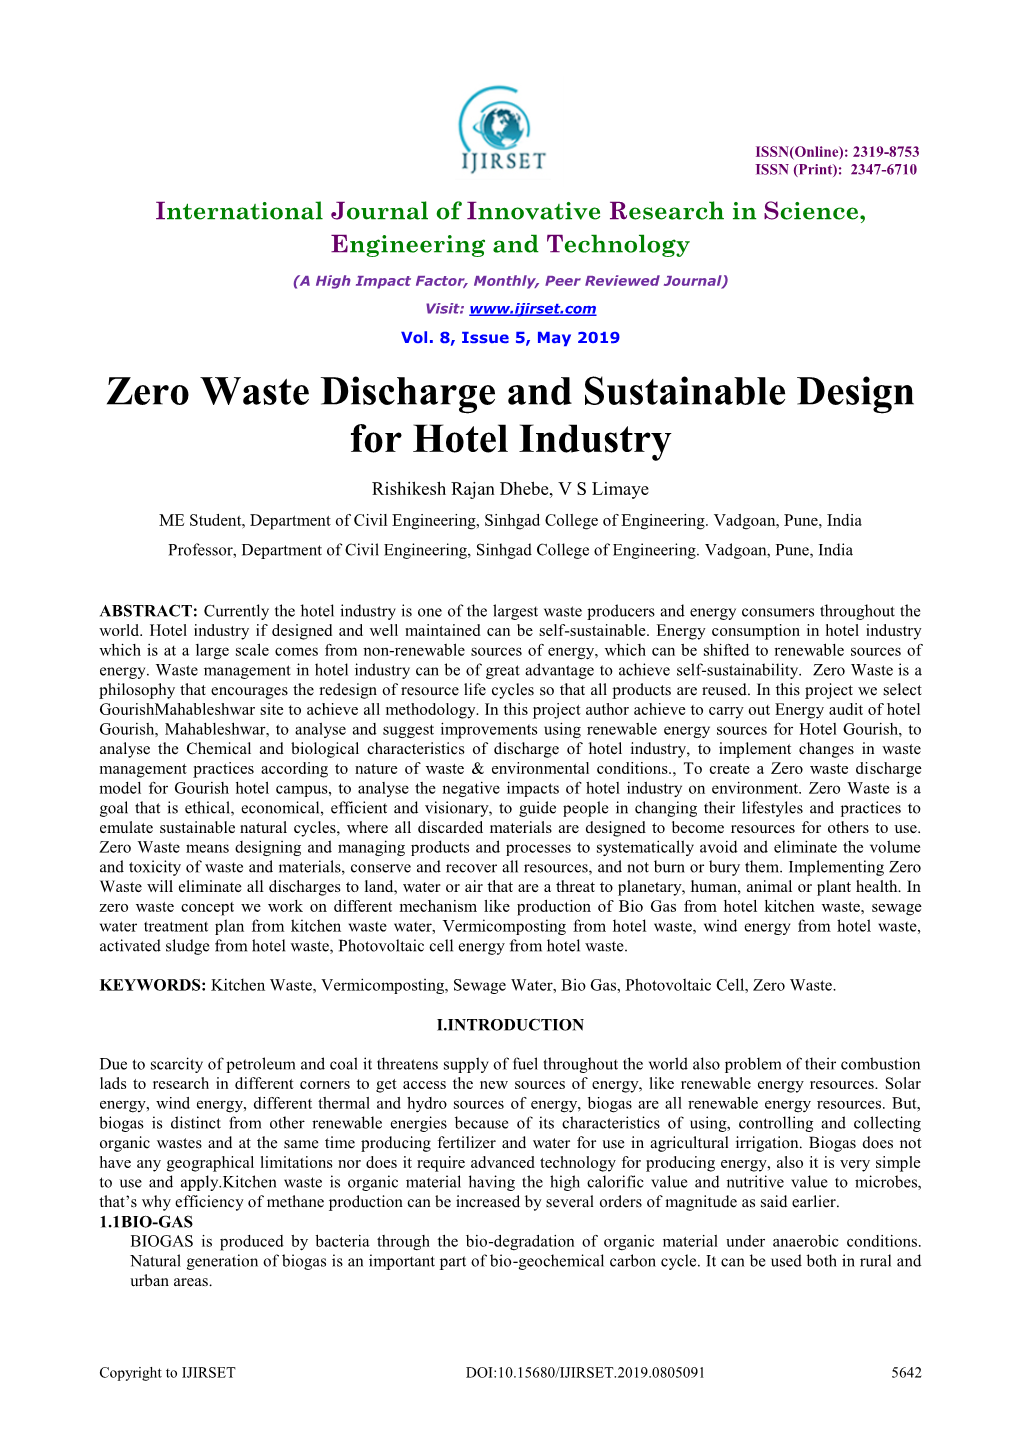 Zero Waste Discharge and Sustainable Design for Hotel Industry